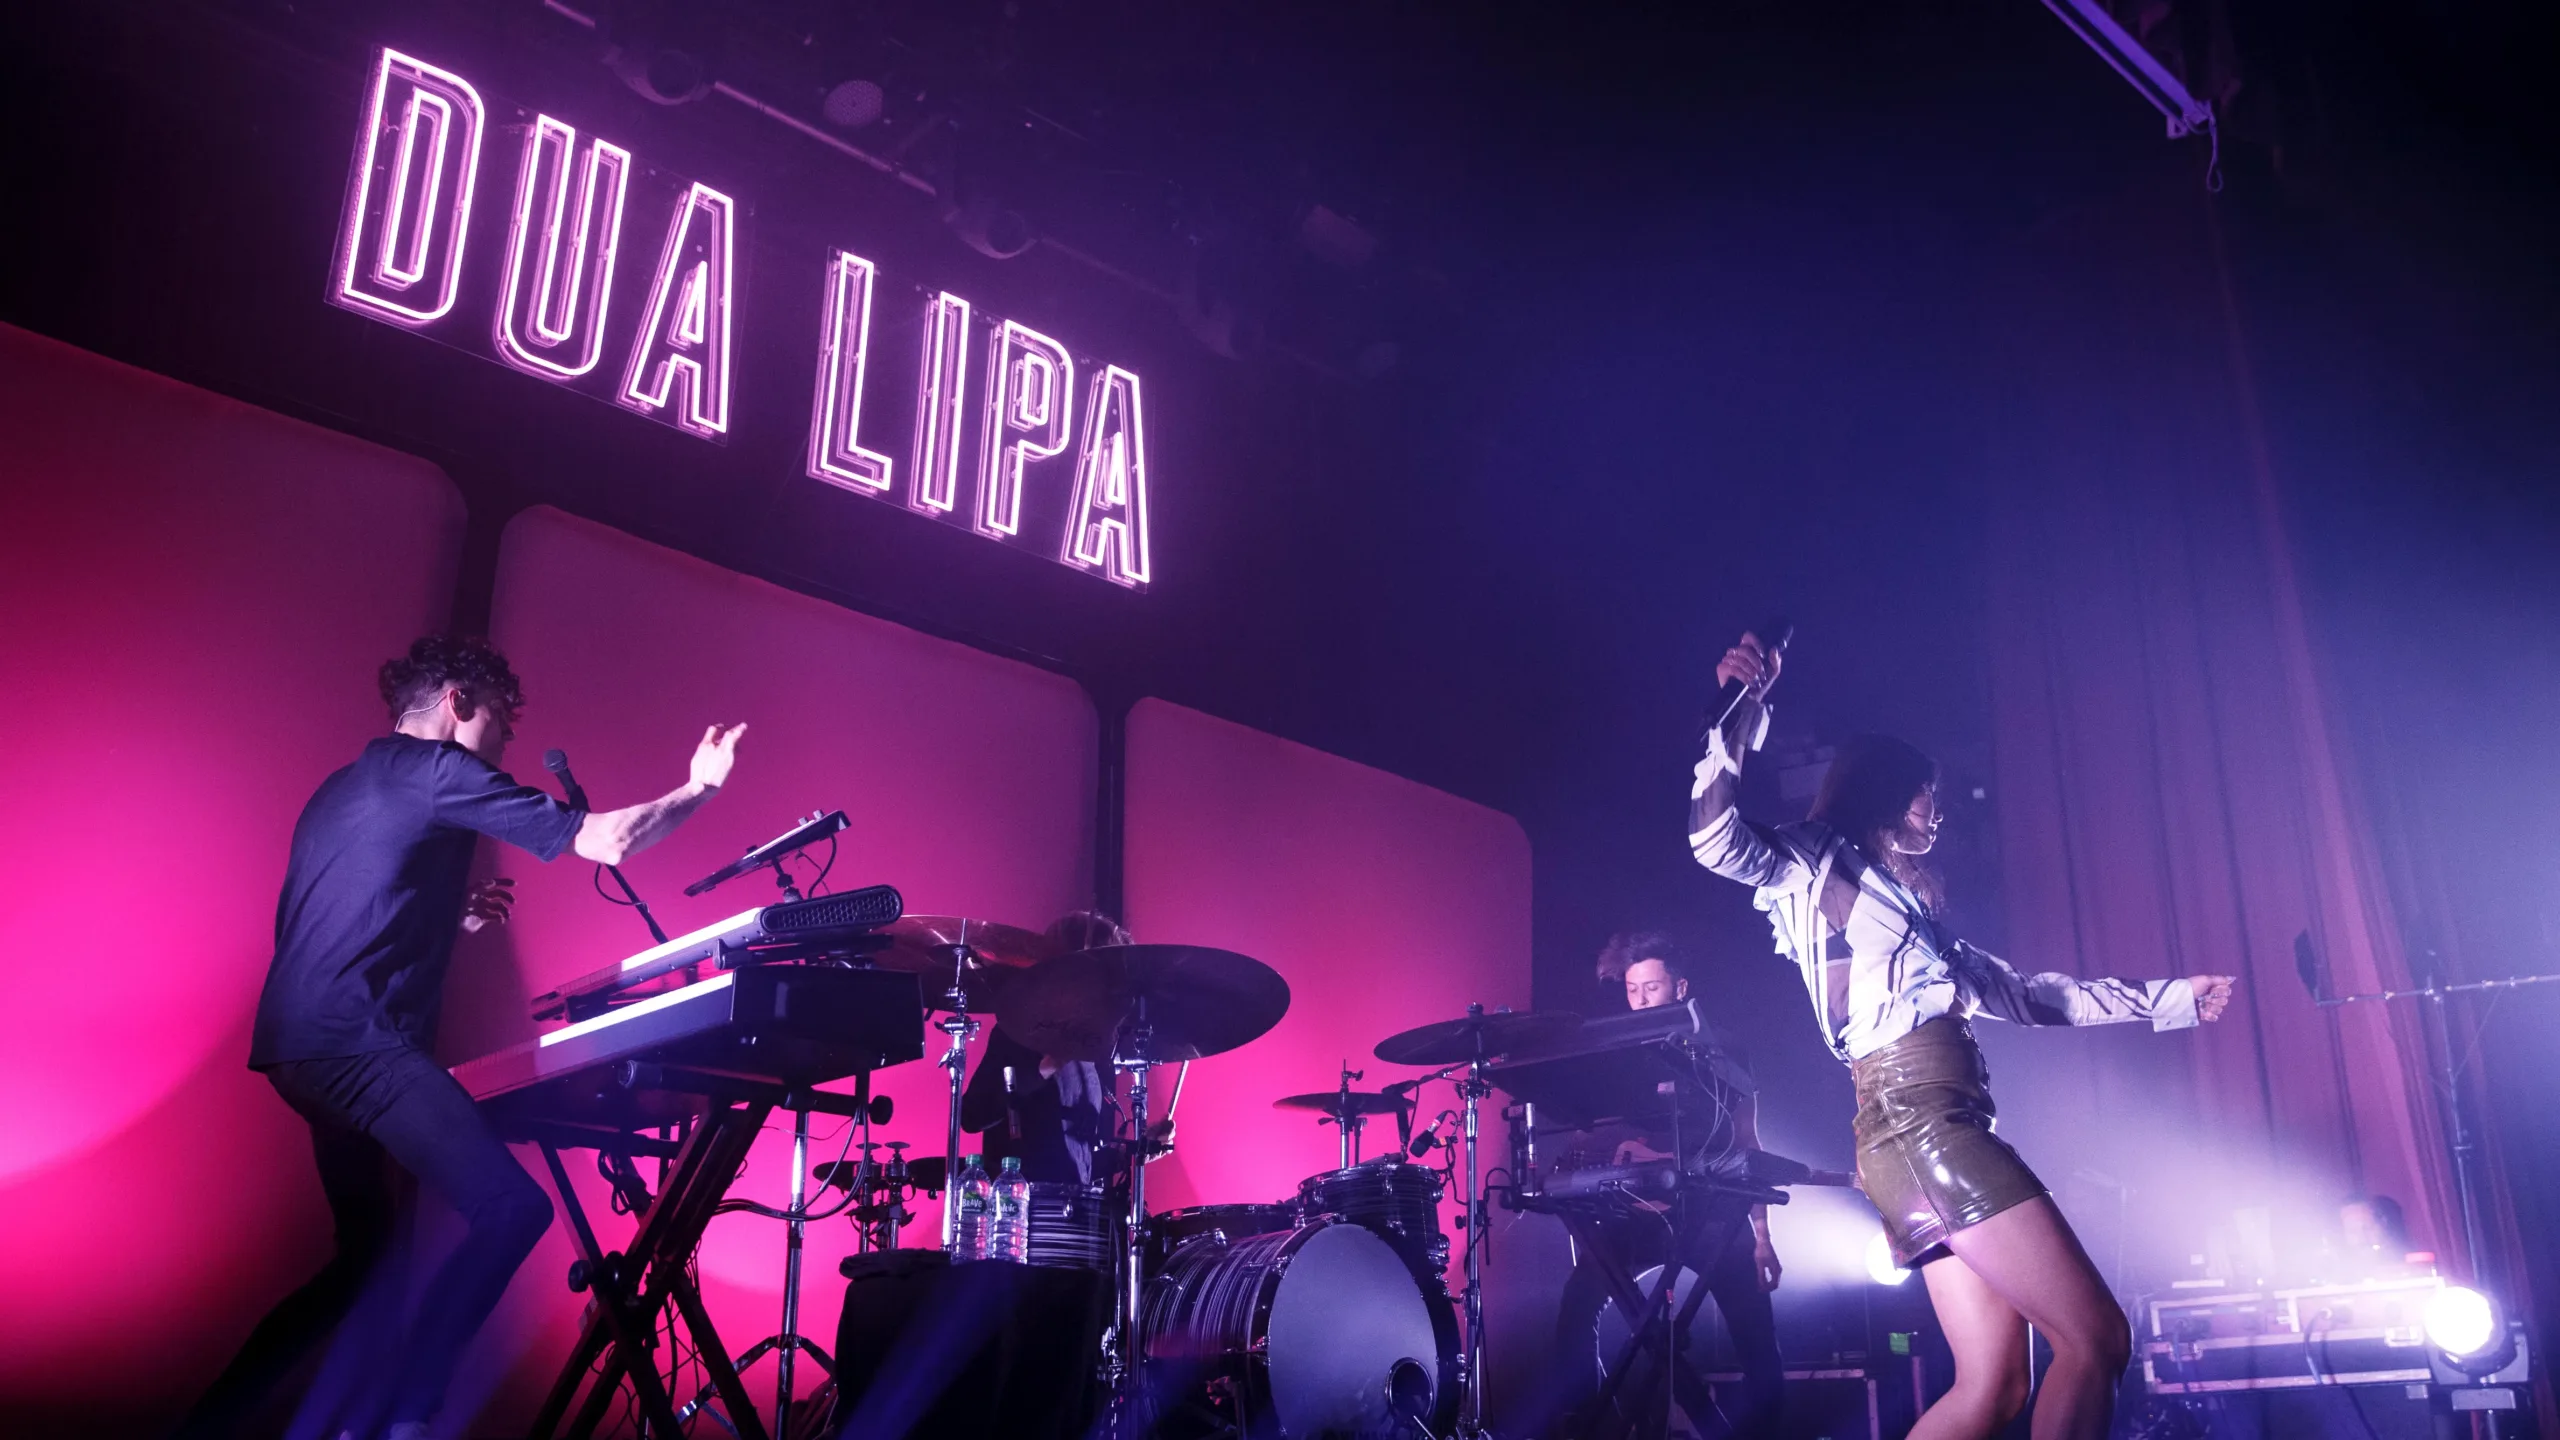 Dua Lipa performs with band on stage against a pink backdrop